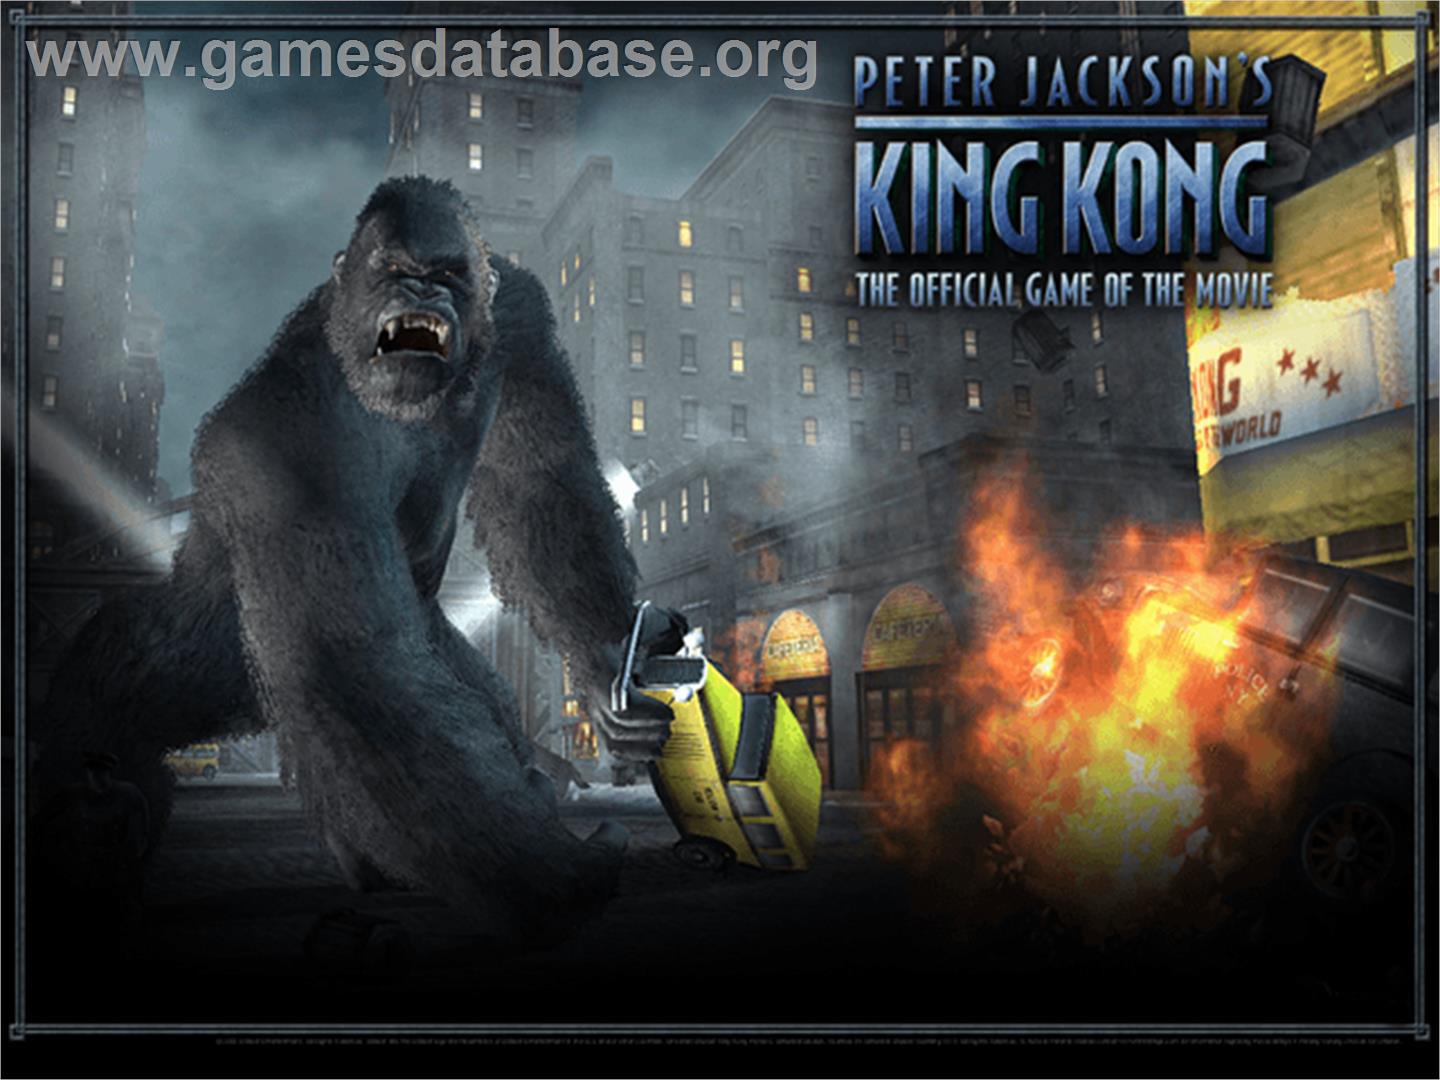 Peter Jackson's King Kong: The Official Game of the Movie - Microsoft Xbox - Artwork - Title Screen